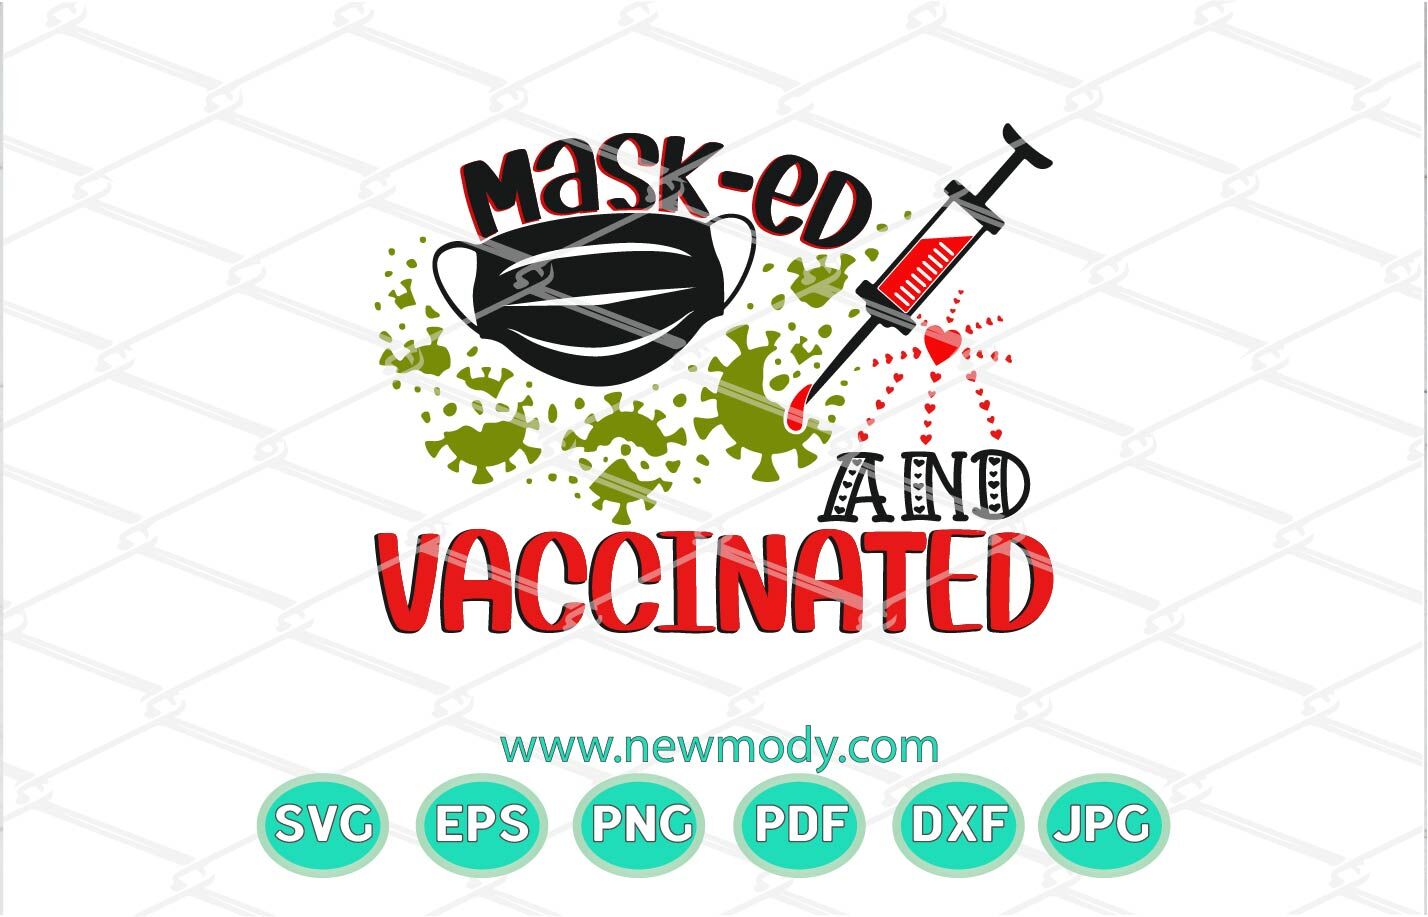 2021 Vaccinated Png Vaccination Svg Masked Svg Png Eps Dxf Pdf Funny Vaccine Png Digital Cricut File Masked and Vaccinated Svg